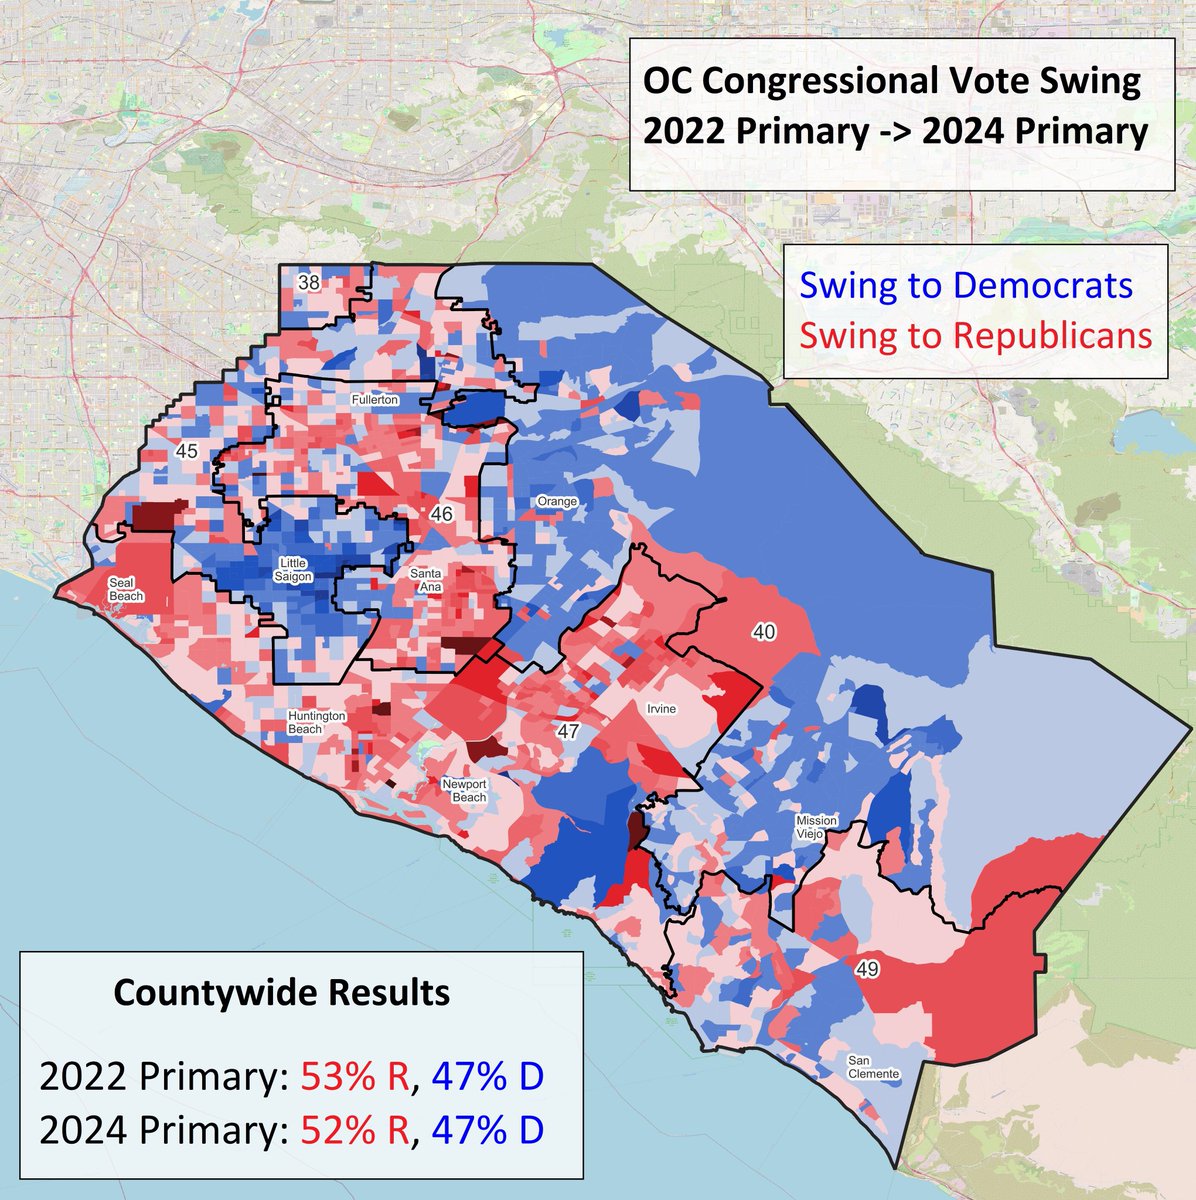 Despite much worse Dem turnout, OC House Dem candidates did slightly better this year than in 2022

Big highlights:
1) Dems did fantastic in Little Saigon with two Viet candidates
2) Without incumbent Porter in CA47, Dems did worse
3) Big swing against Young Kim in CA40